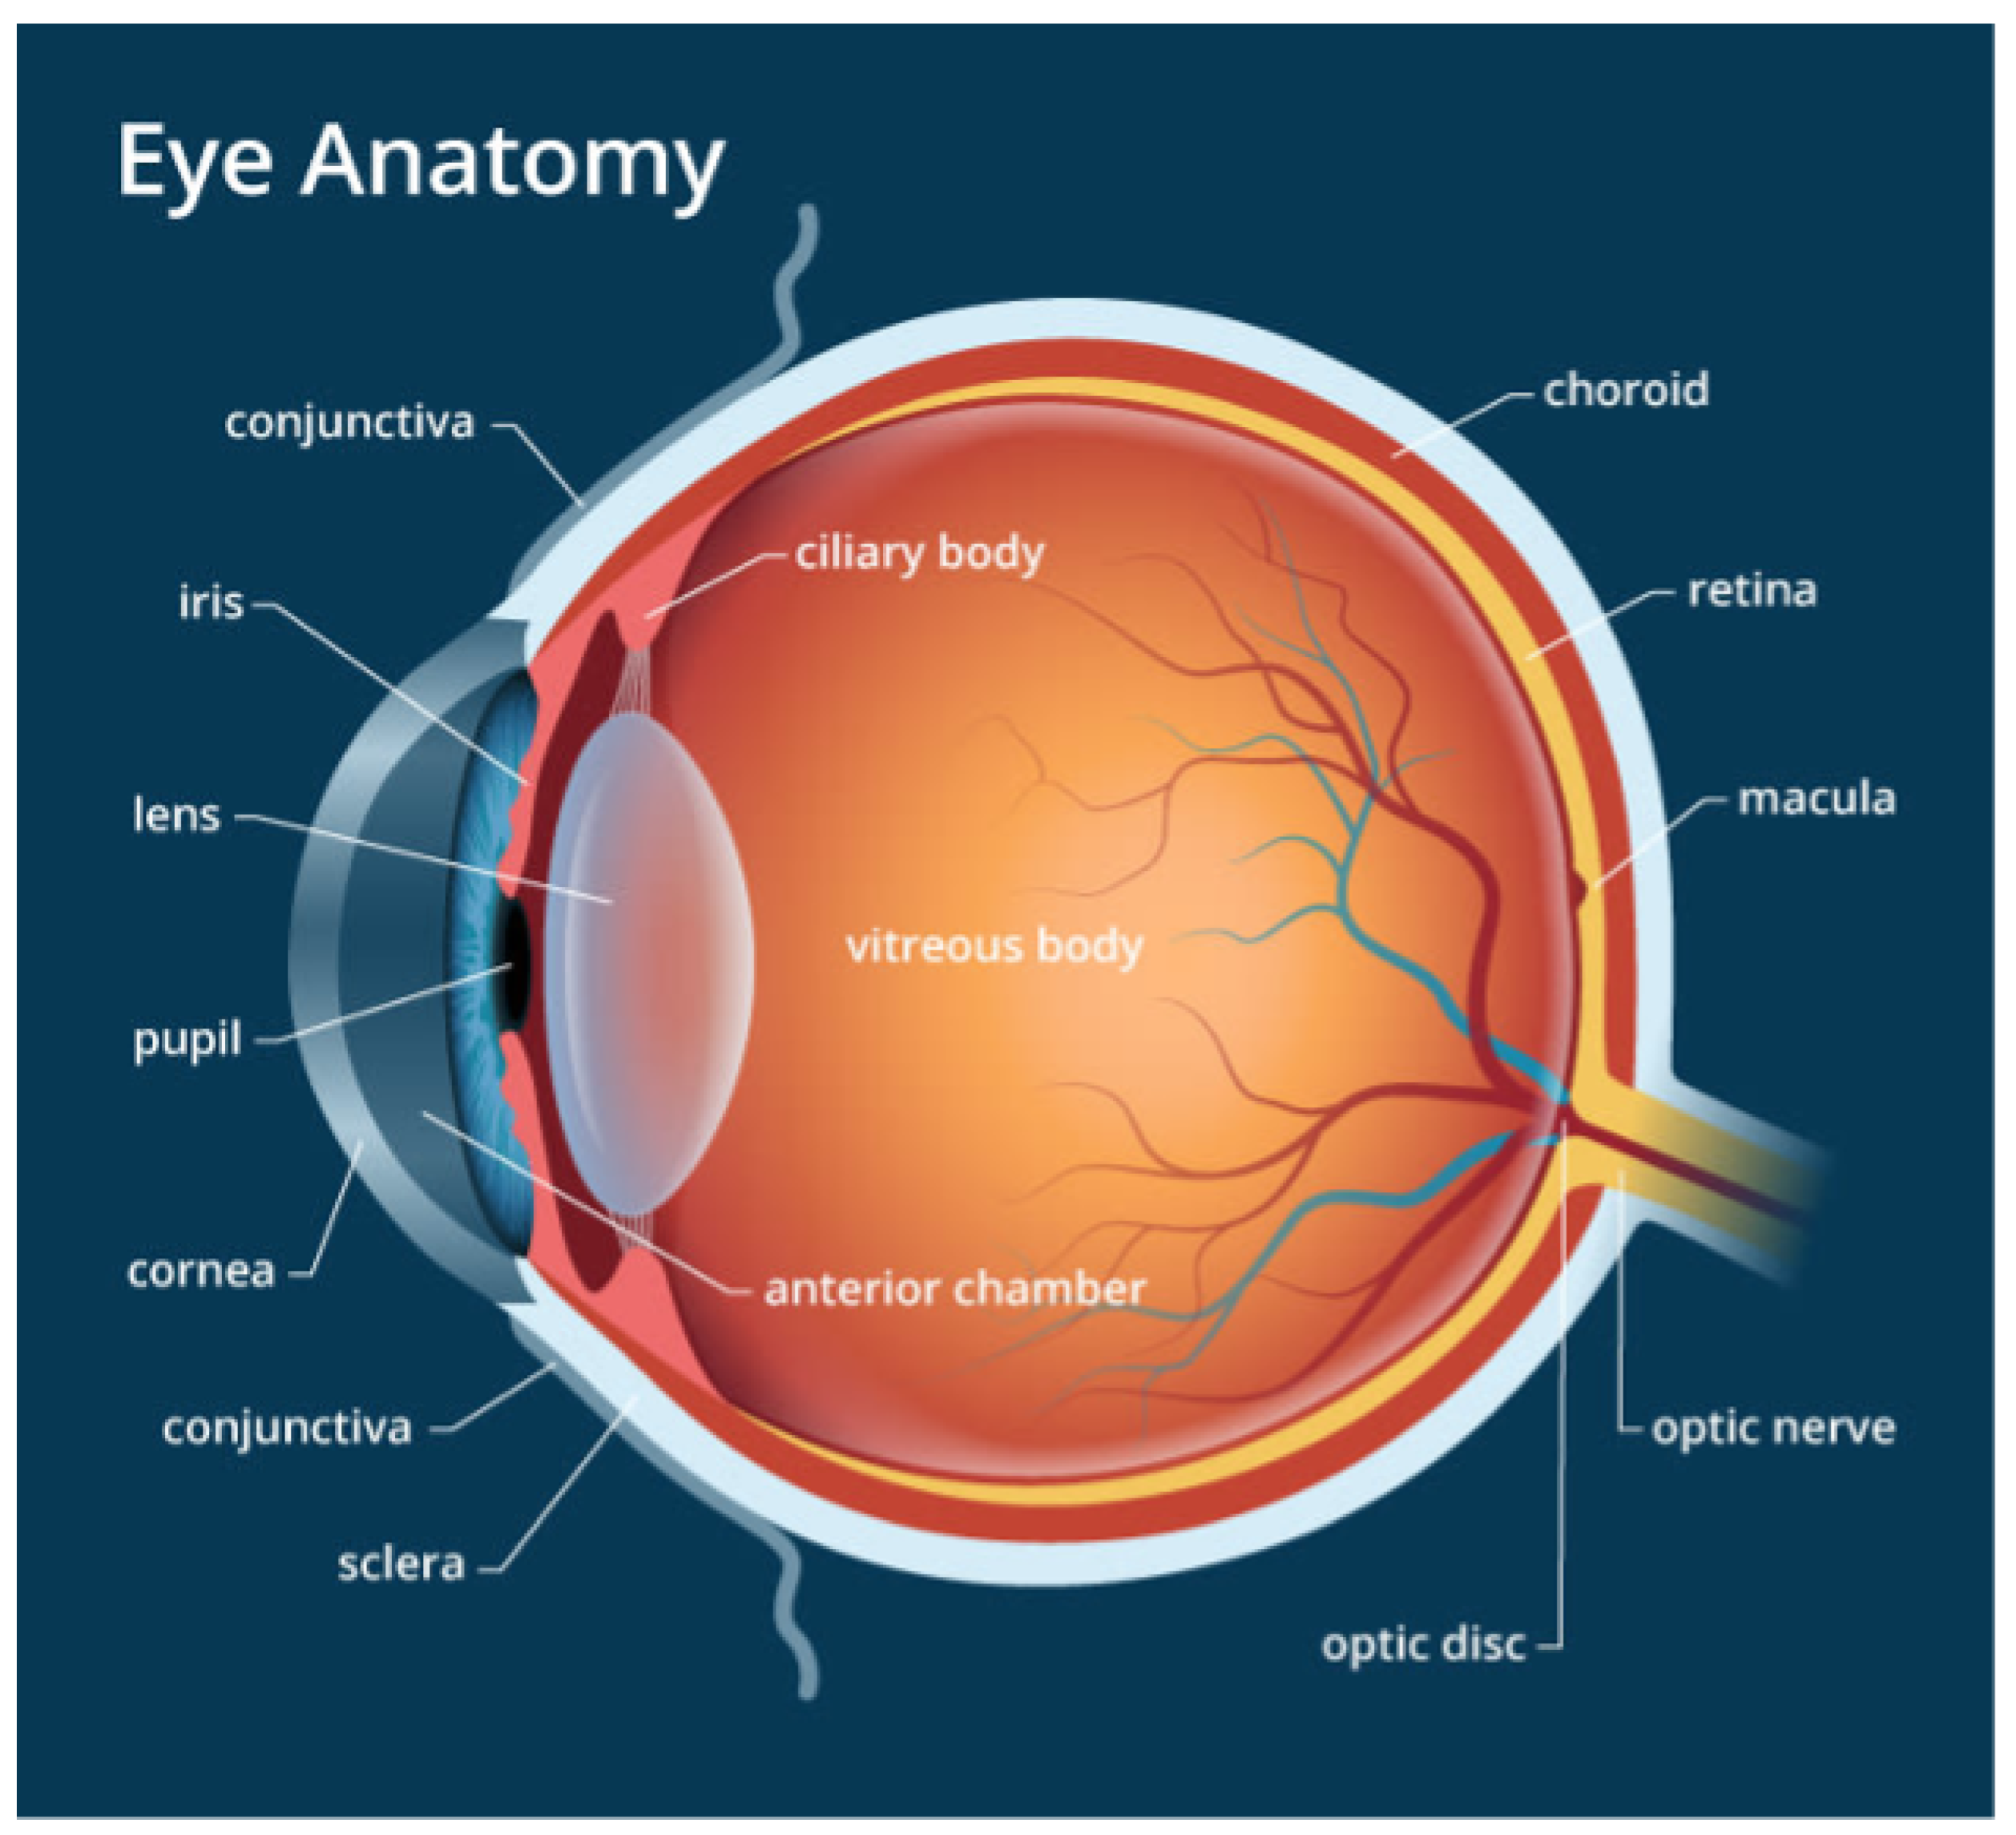 Retina Specialist - Why should I see one? - SK Retina